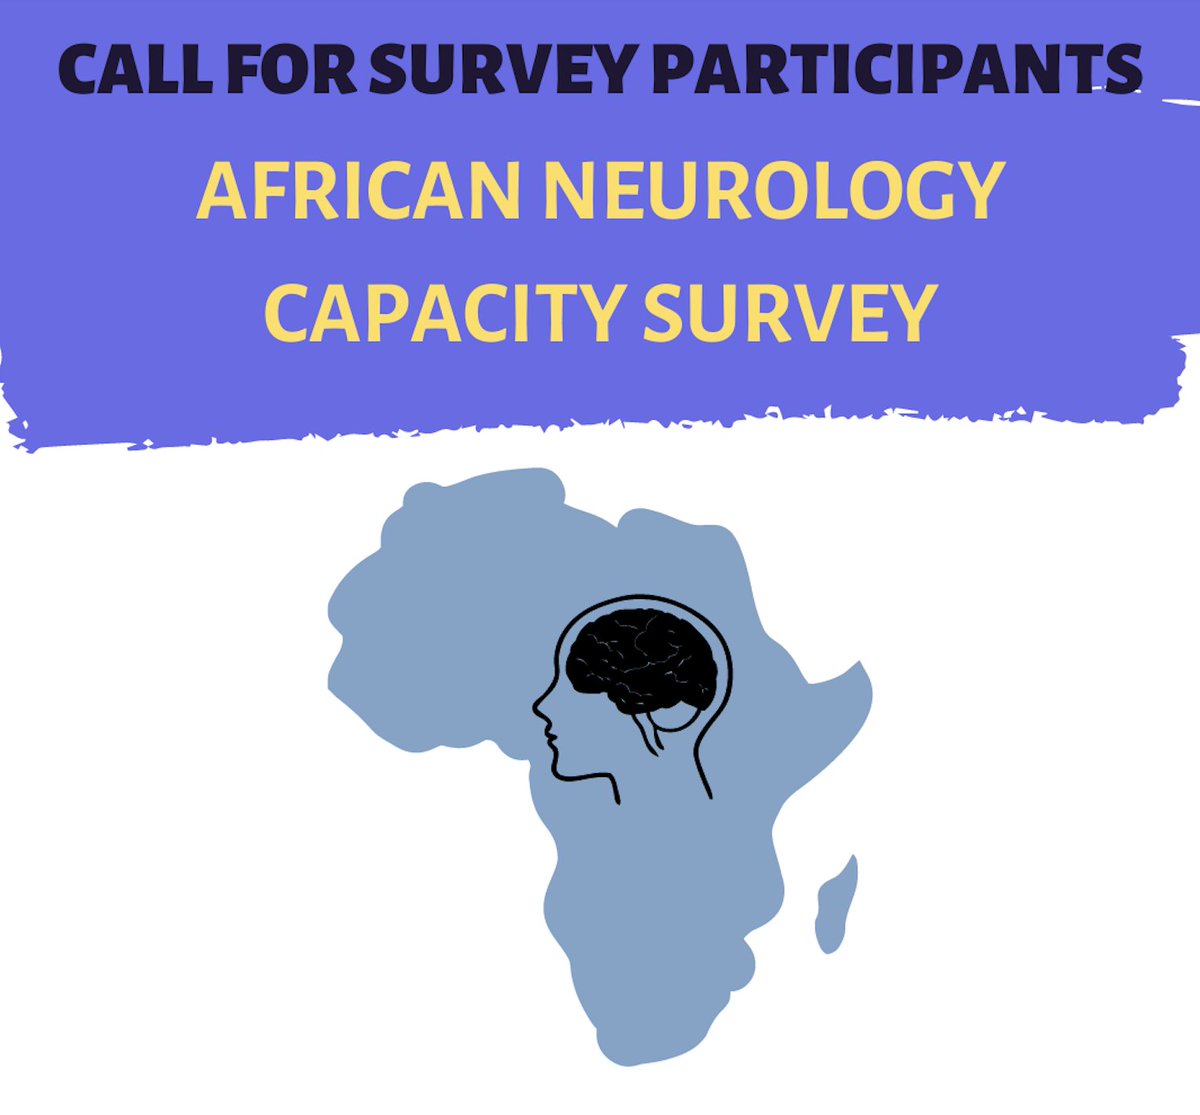 We are working to better understand the capacities for neurologic care across the African continent. If you are a health care worker in Africa who takes care of patients with neurologic disease, please complete our survey! Link: redcap.link/3h7nbjqo